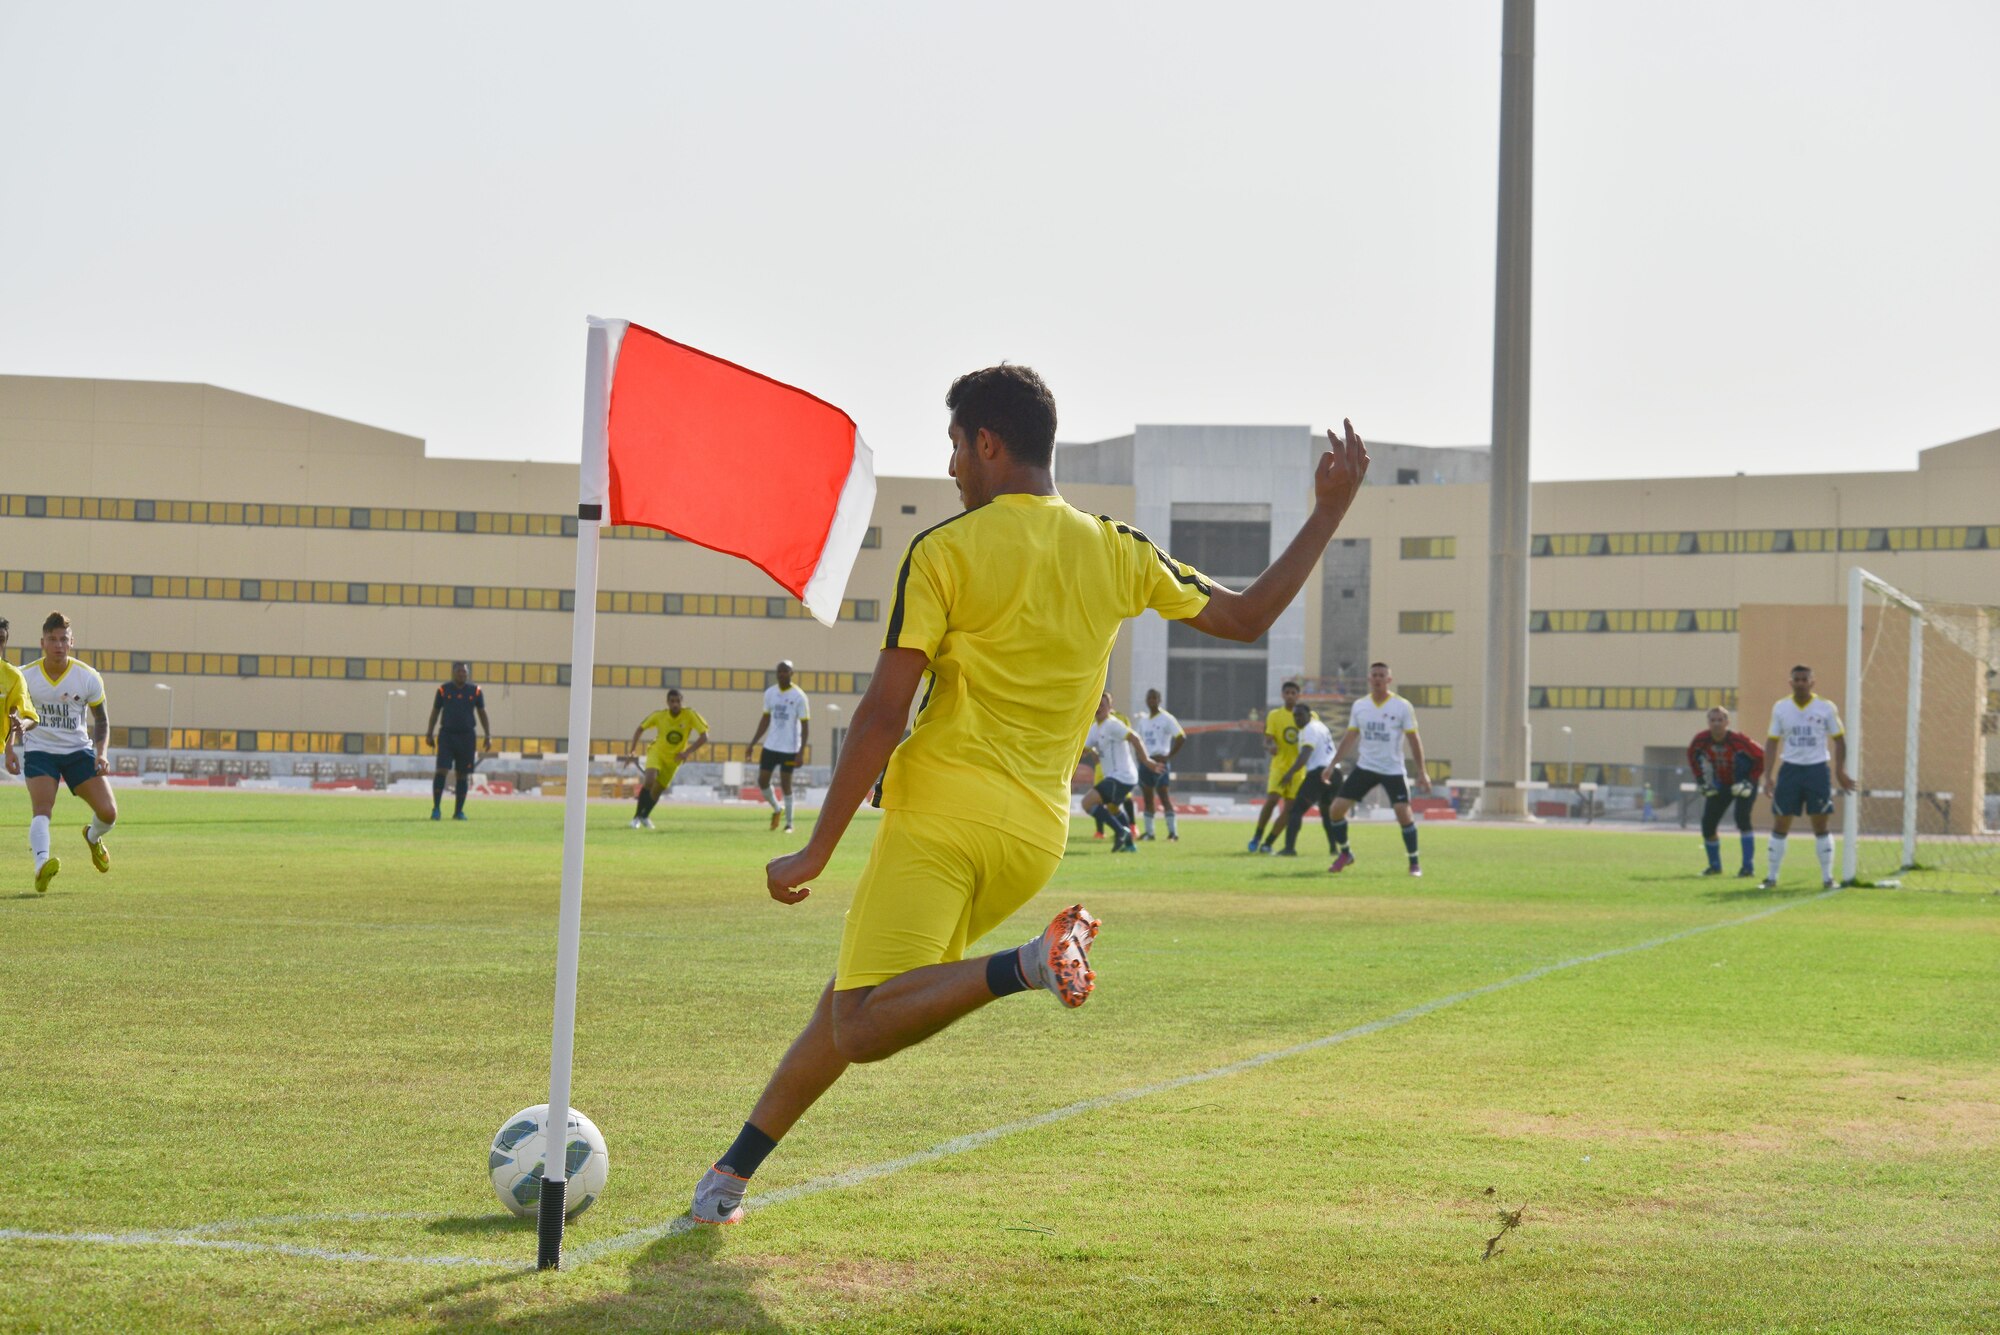 A member of the Qatari Air Base soccer team launches a corner kick towards the goal in a match against the Al Udeid All-Stars in celebration of the 240th U.S.  Army birthday June 14, 2015 at Al Udeid Air Base, Qatar. AUAB All-Stars planned a soccer match to help strengthen the partnership between the U.S. and Qatari military and build friendships between service members. (U.S. Air Force photo/Staff Sgt. Alexandre Montes)